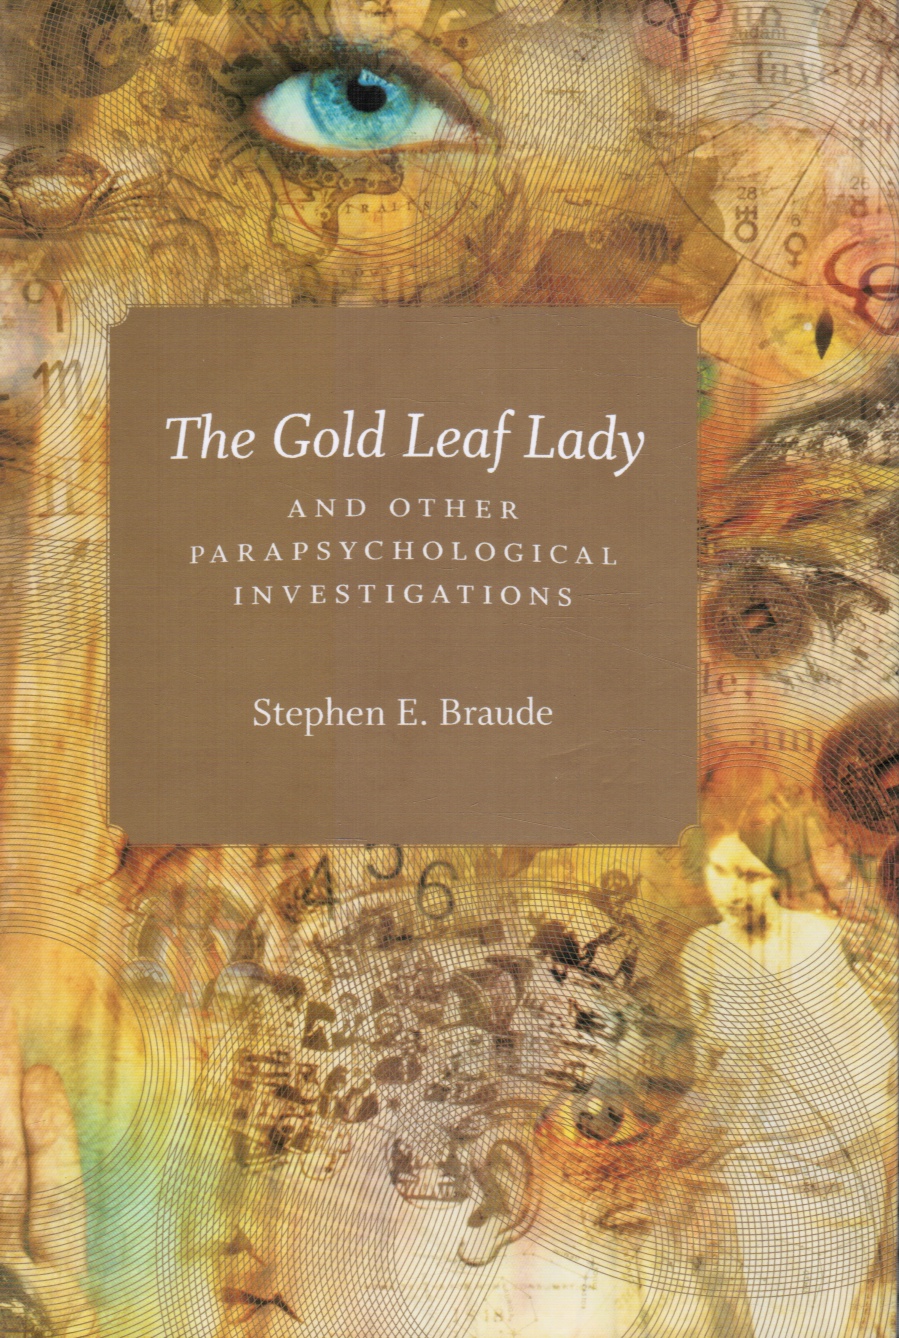 BRAUDE, STEPHEN E. - The Gold Leaf Lady and Other Parapsychological Investigations